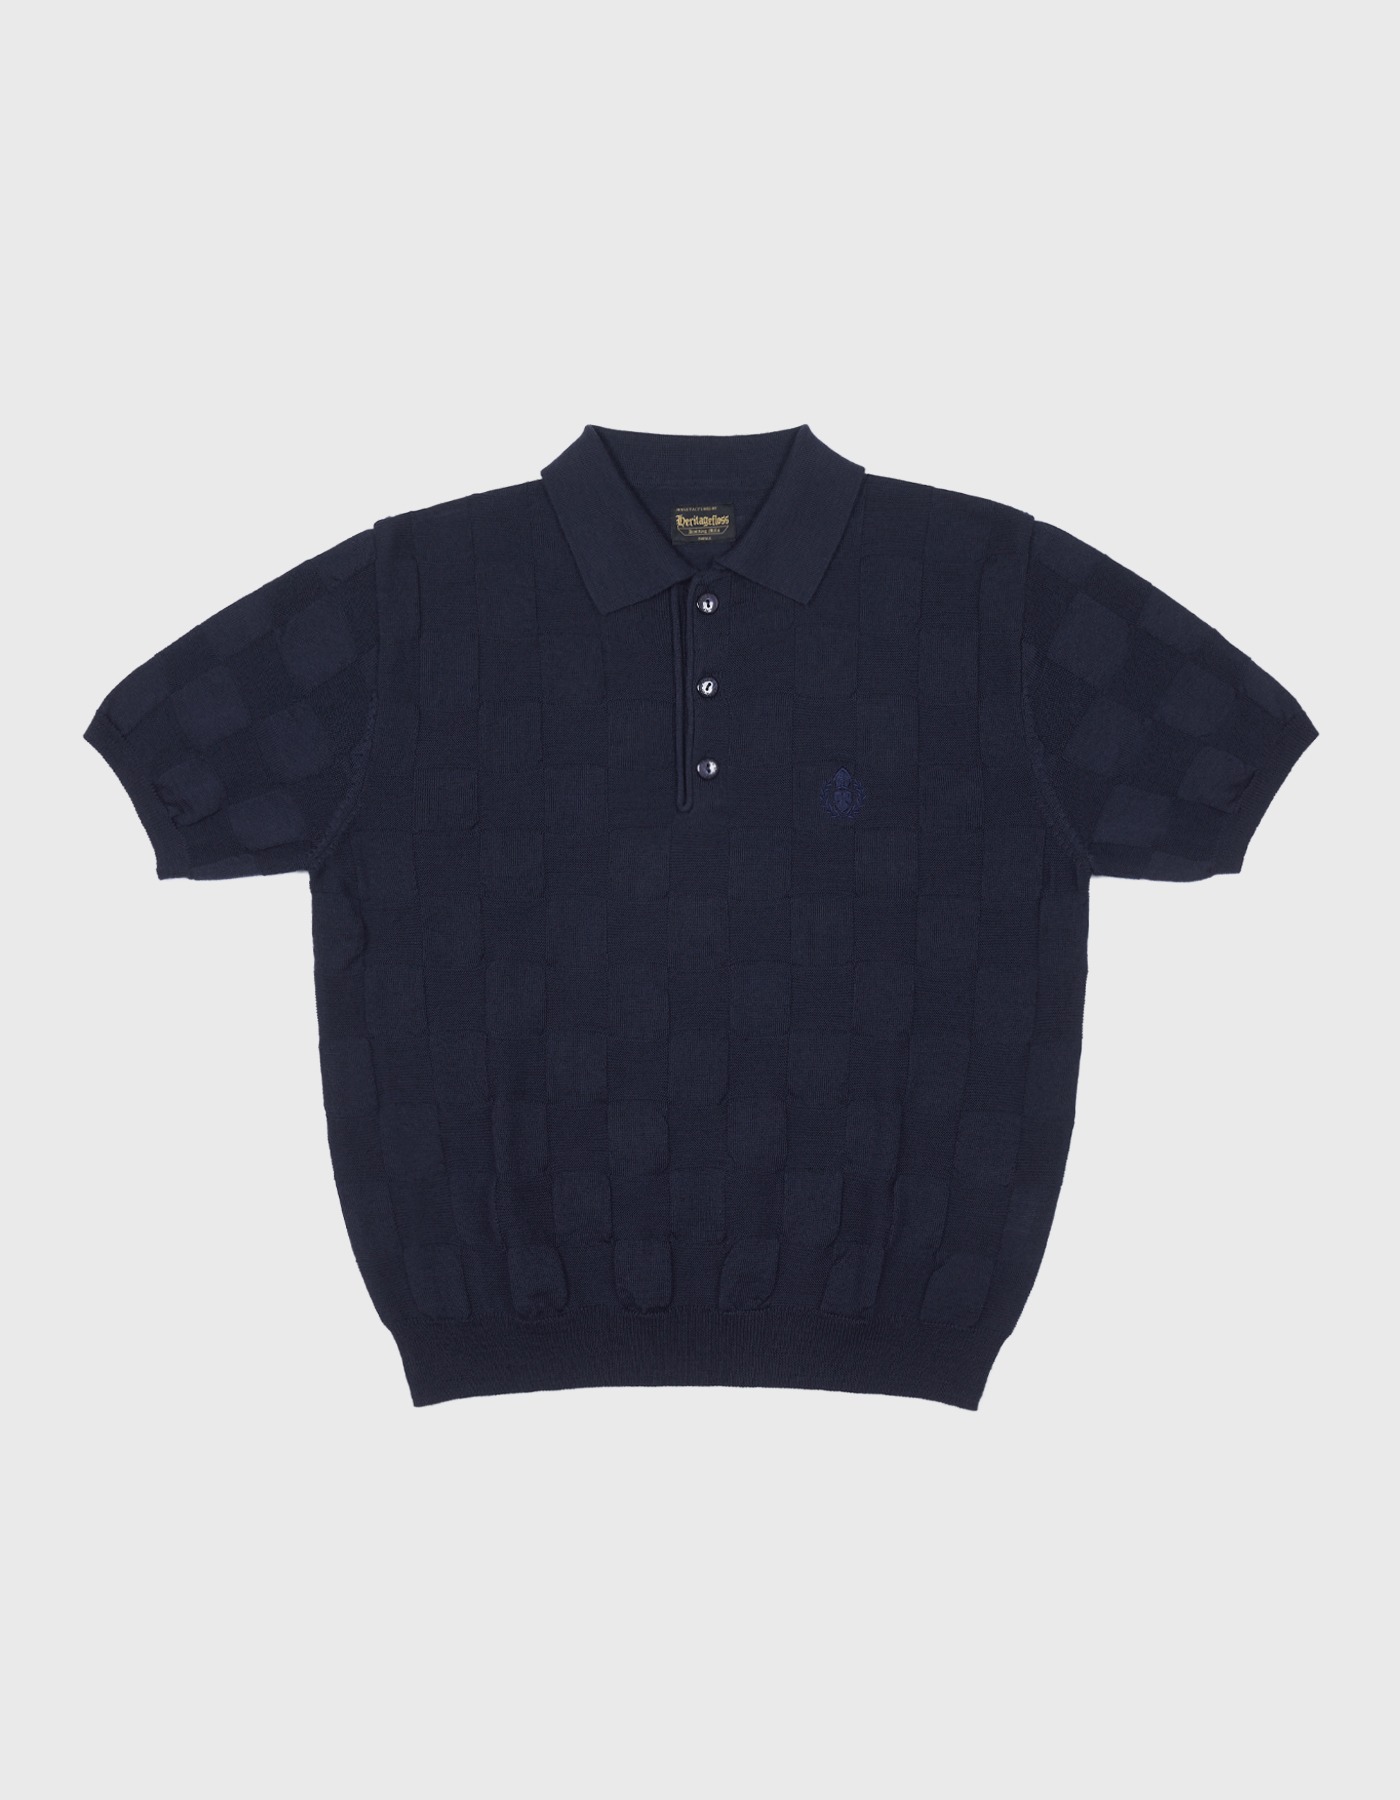 HFC CREST CHECKED POLO SHIRT / Navy